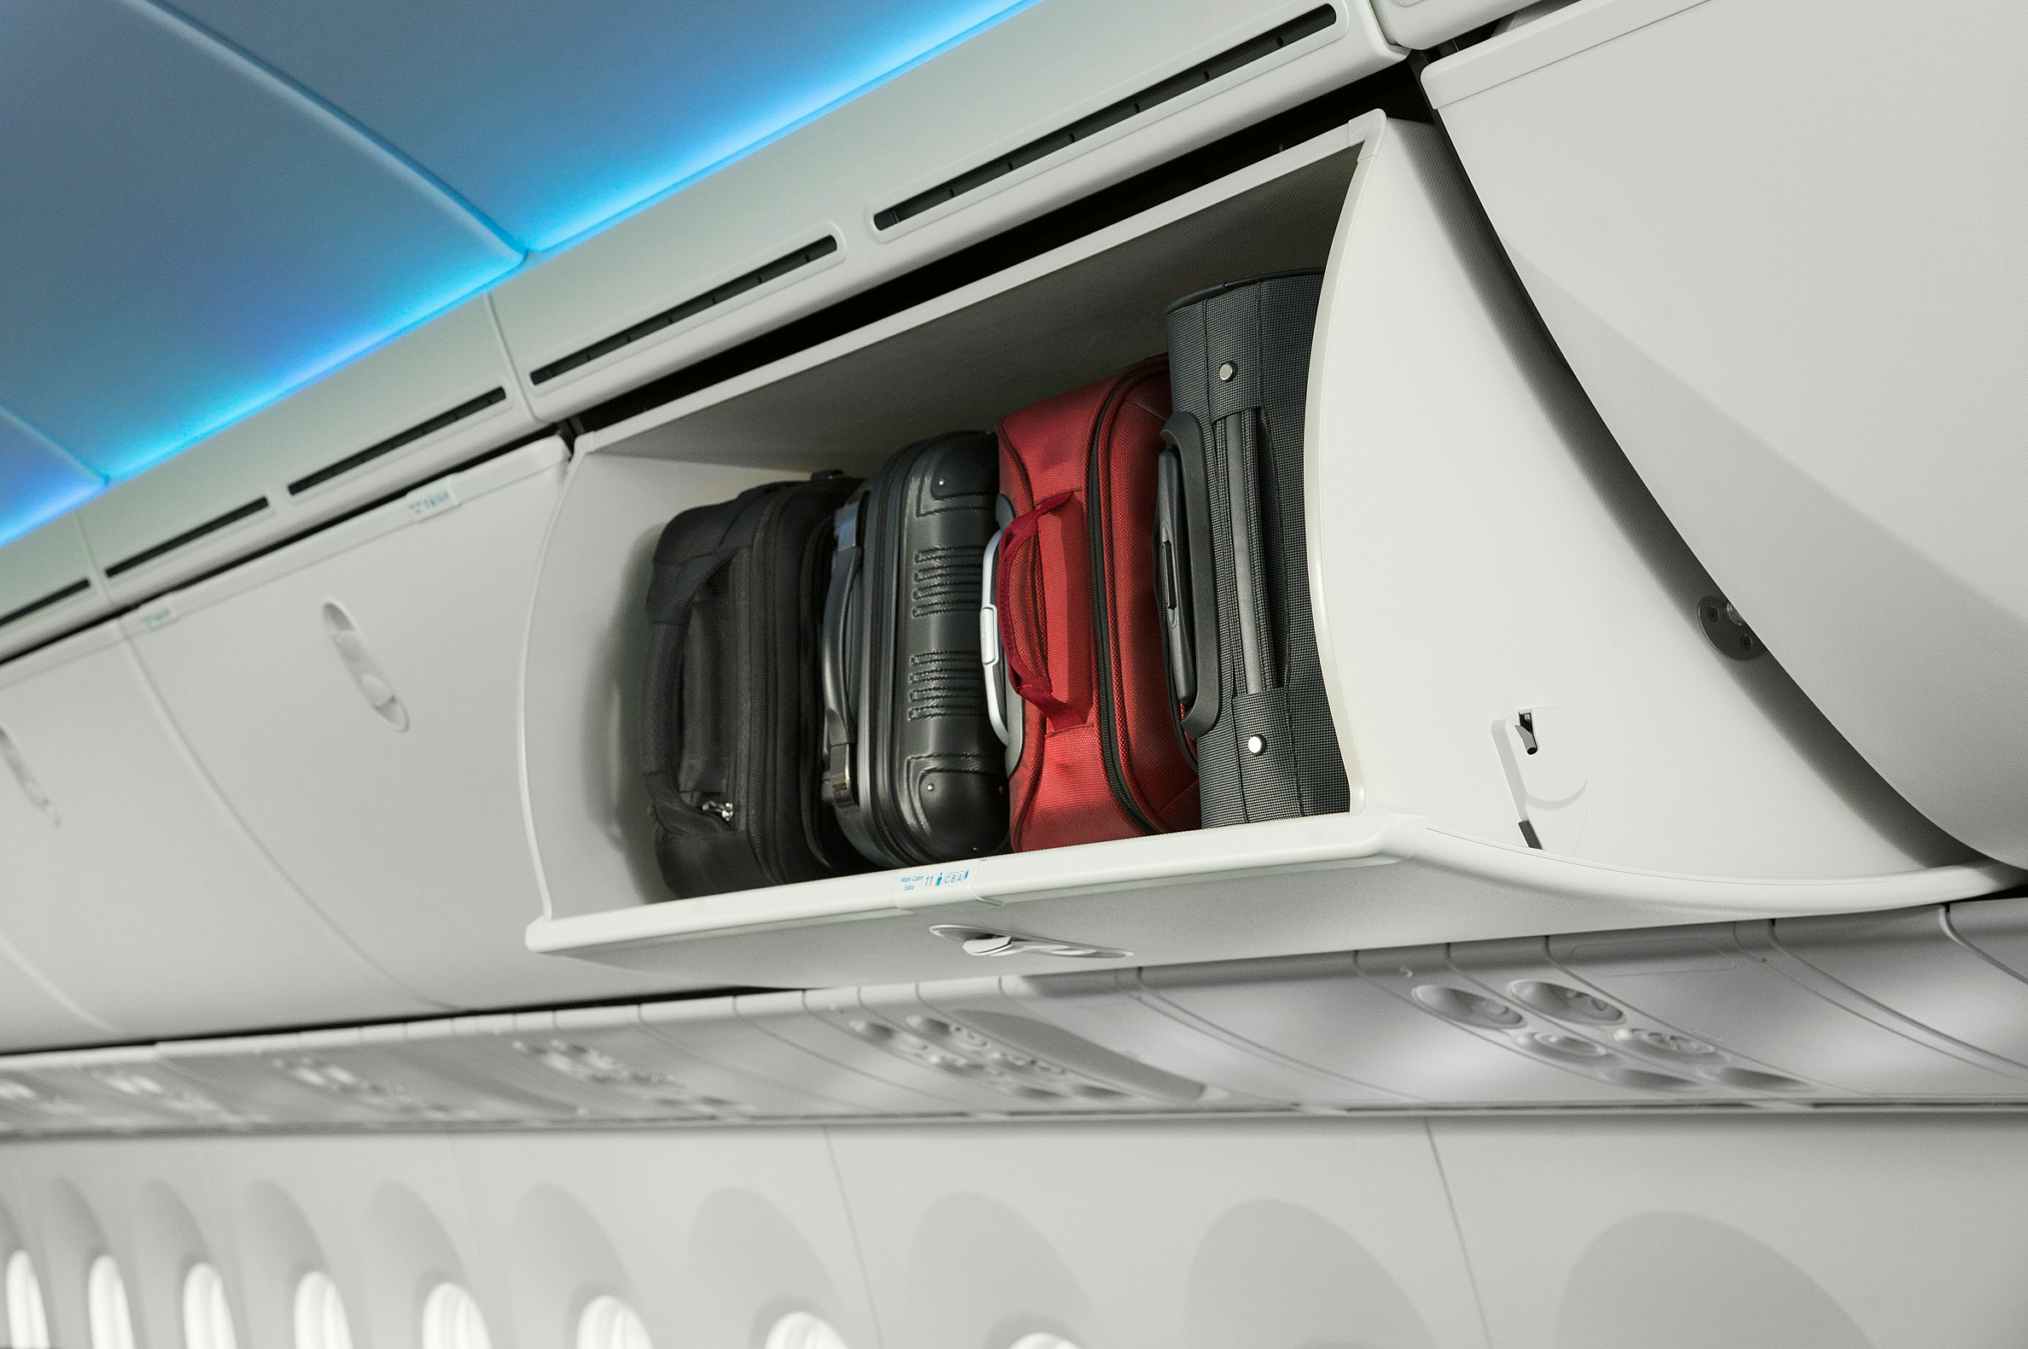 Carry-on bags in the storage compartment above the seats on an American Airlines plane